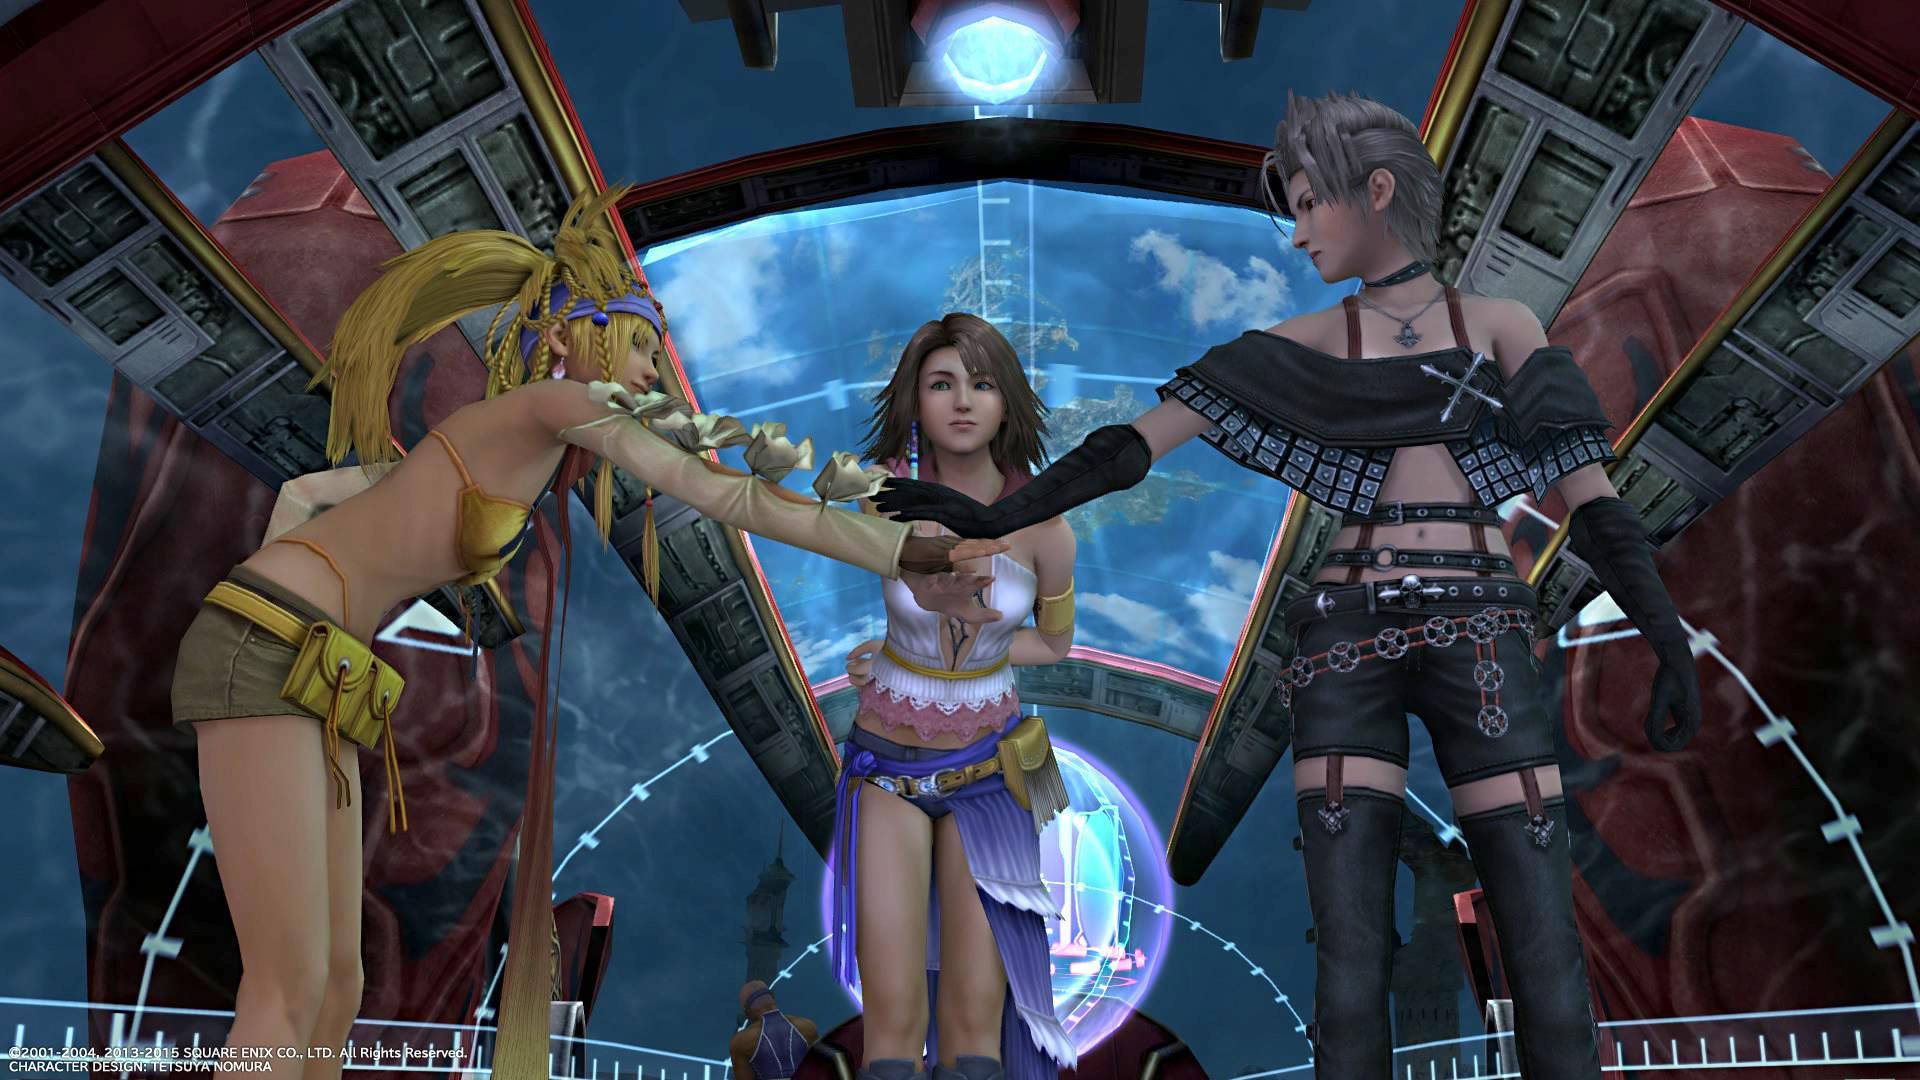 Buy Final Fantasy X X 2 Hd Remaster Pc Cd Key For Steam Compare Prices